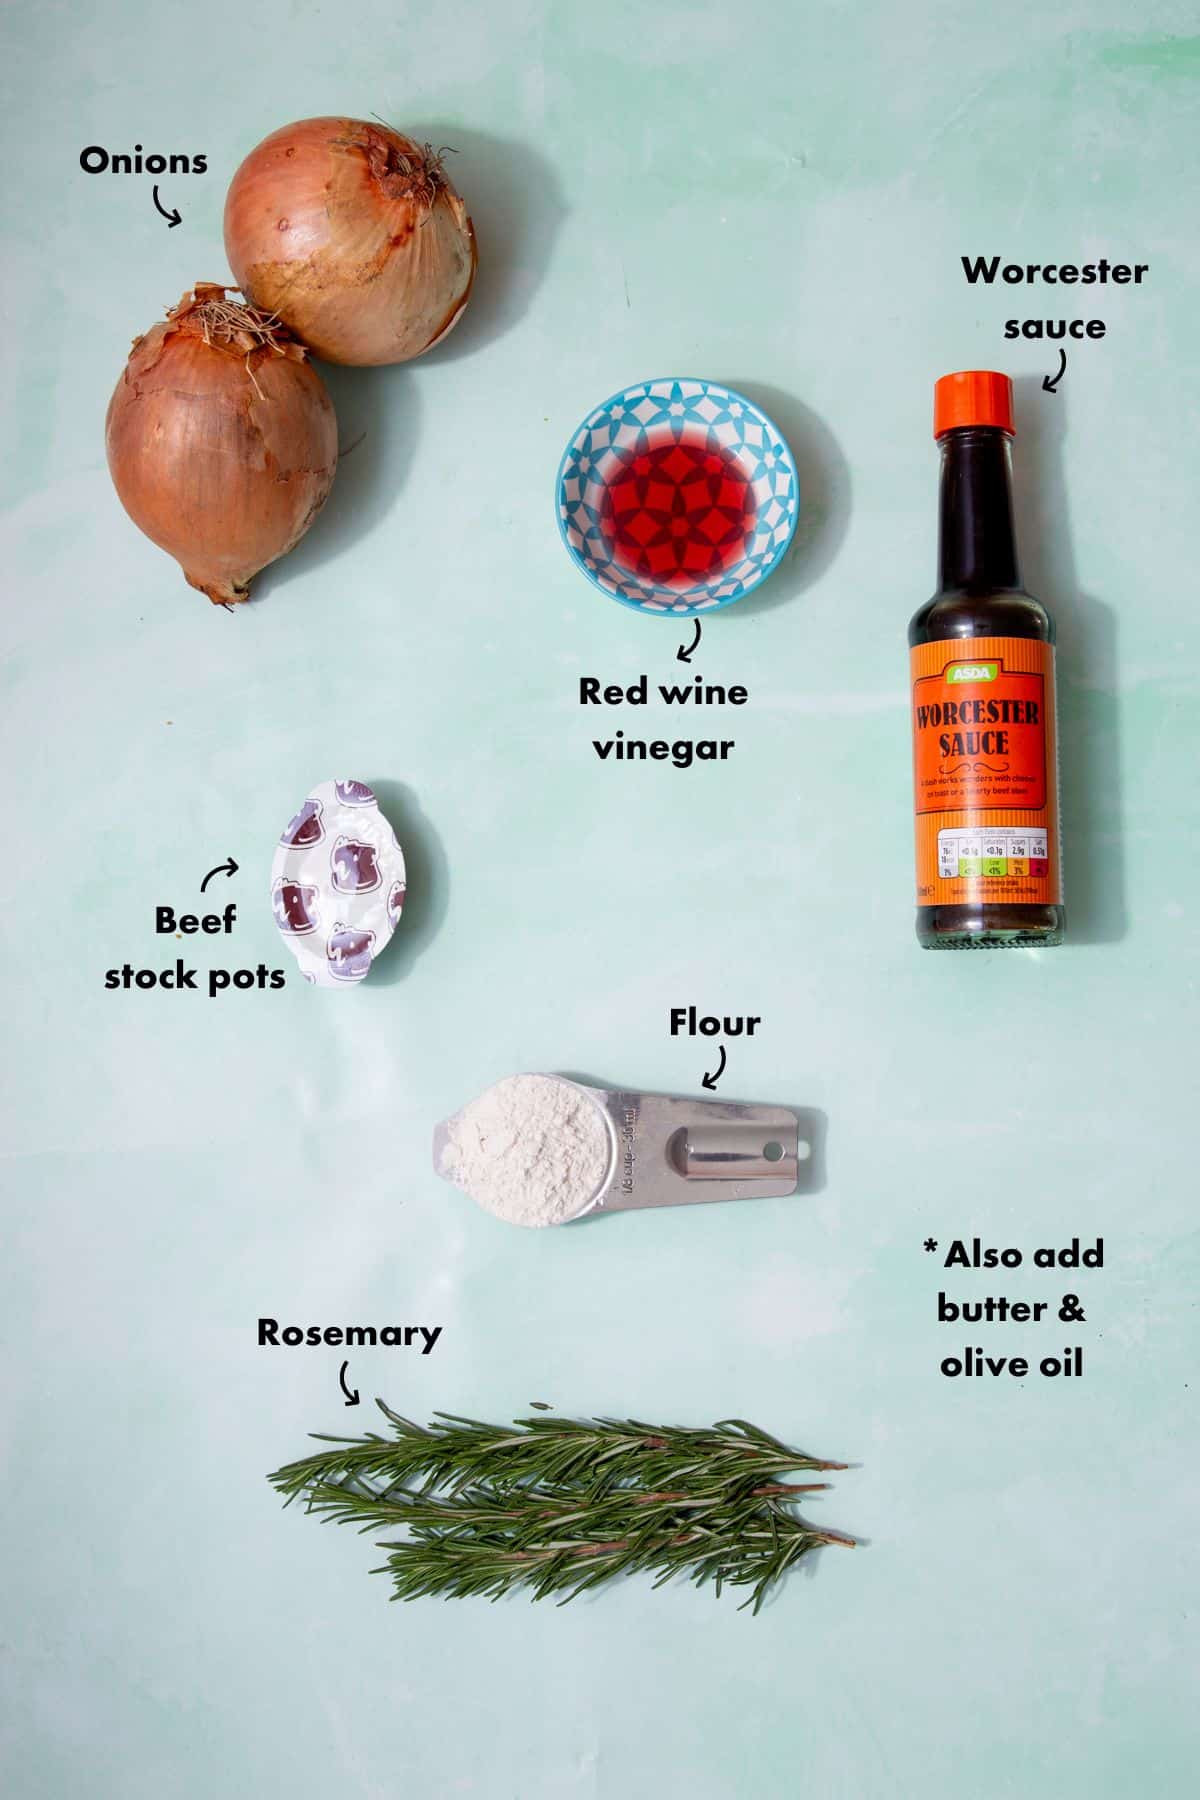 Ingredients to make onion gravy laid out on a pale blue background and labelled.